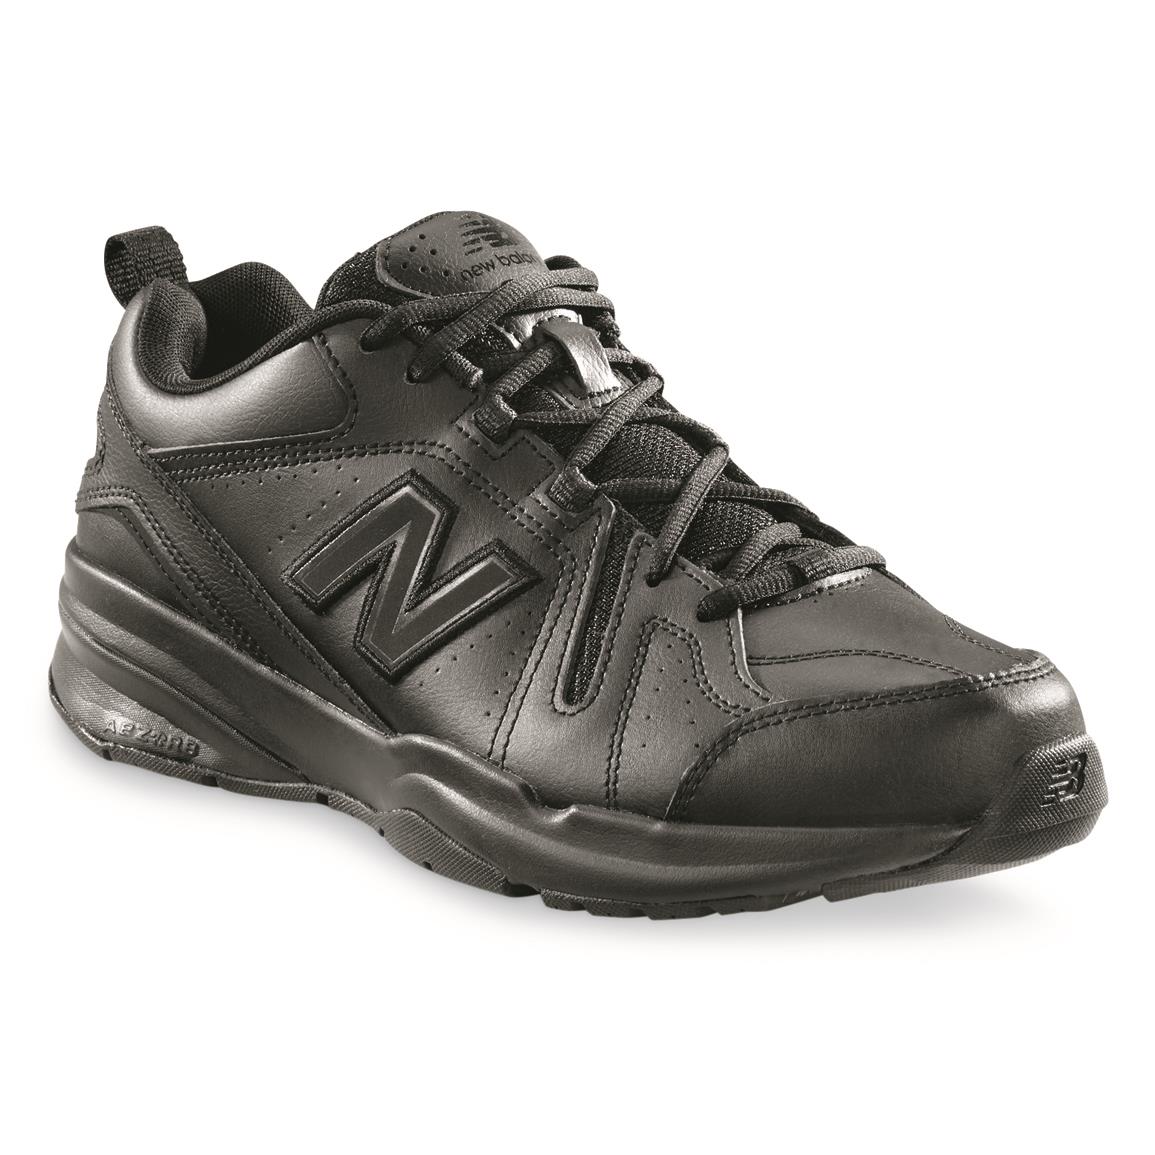 Mens New Balance Shoes | Sportsman's Guide